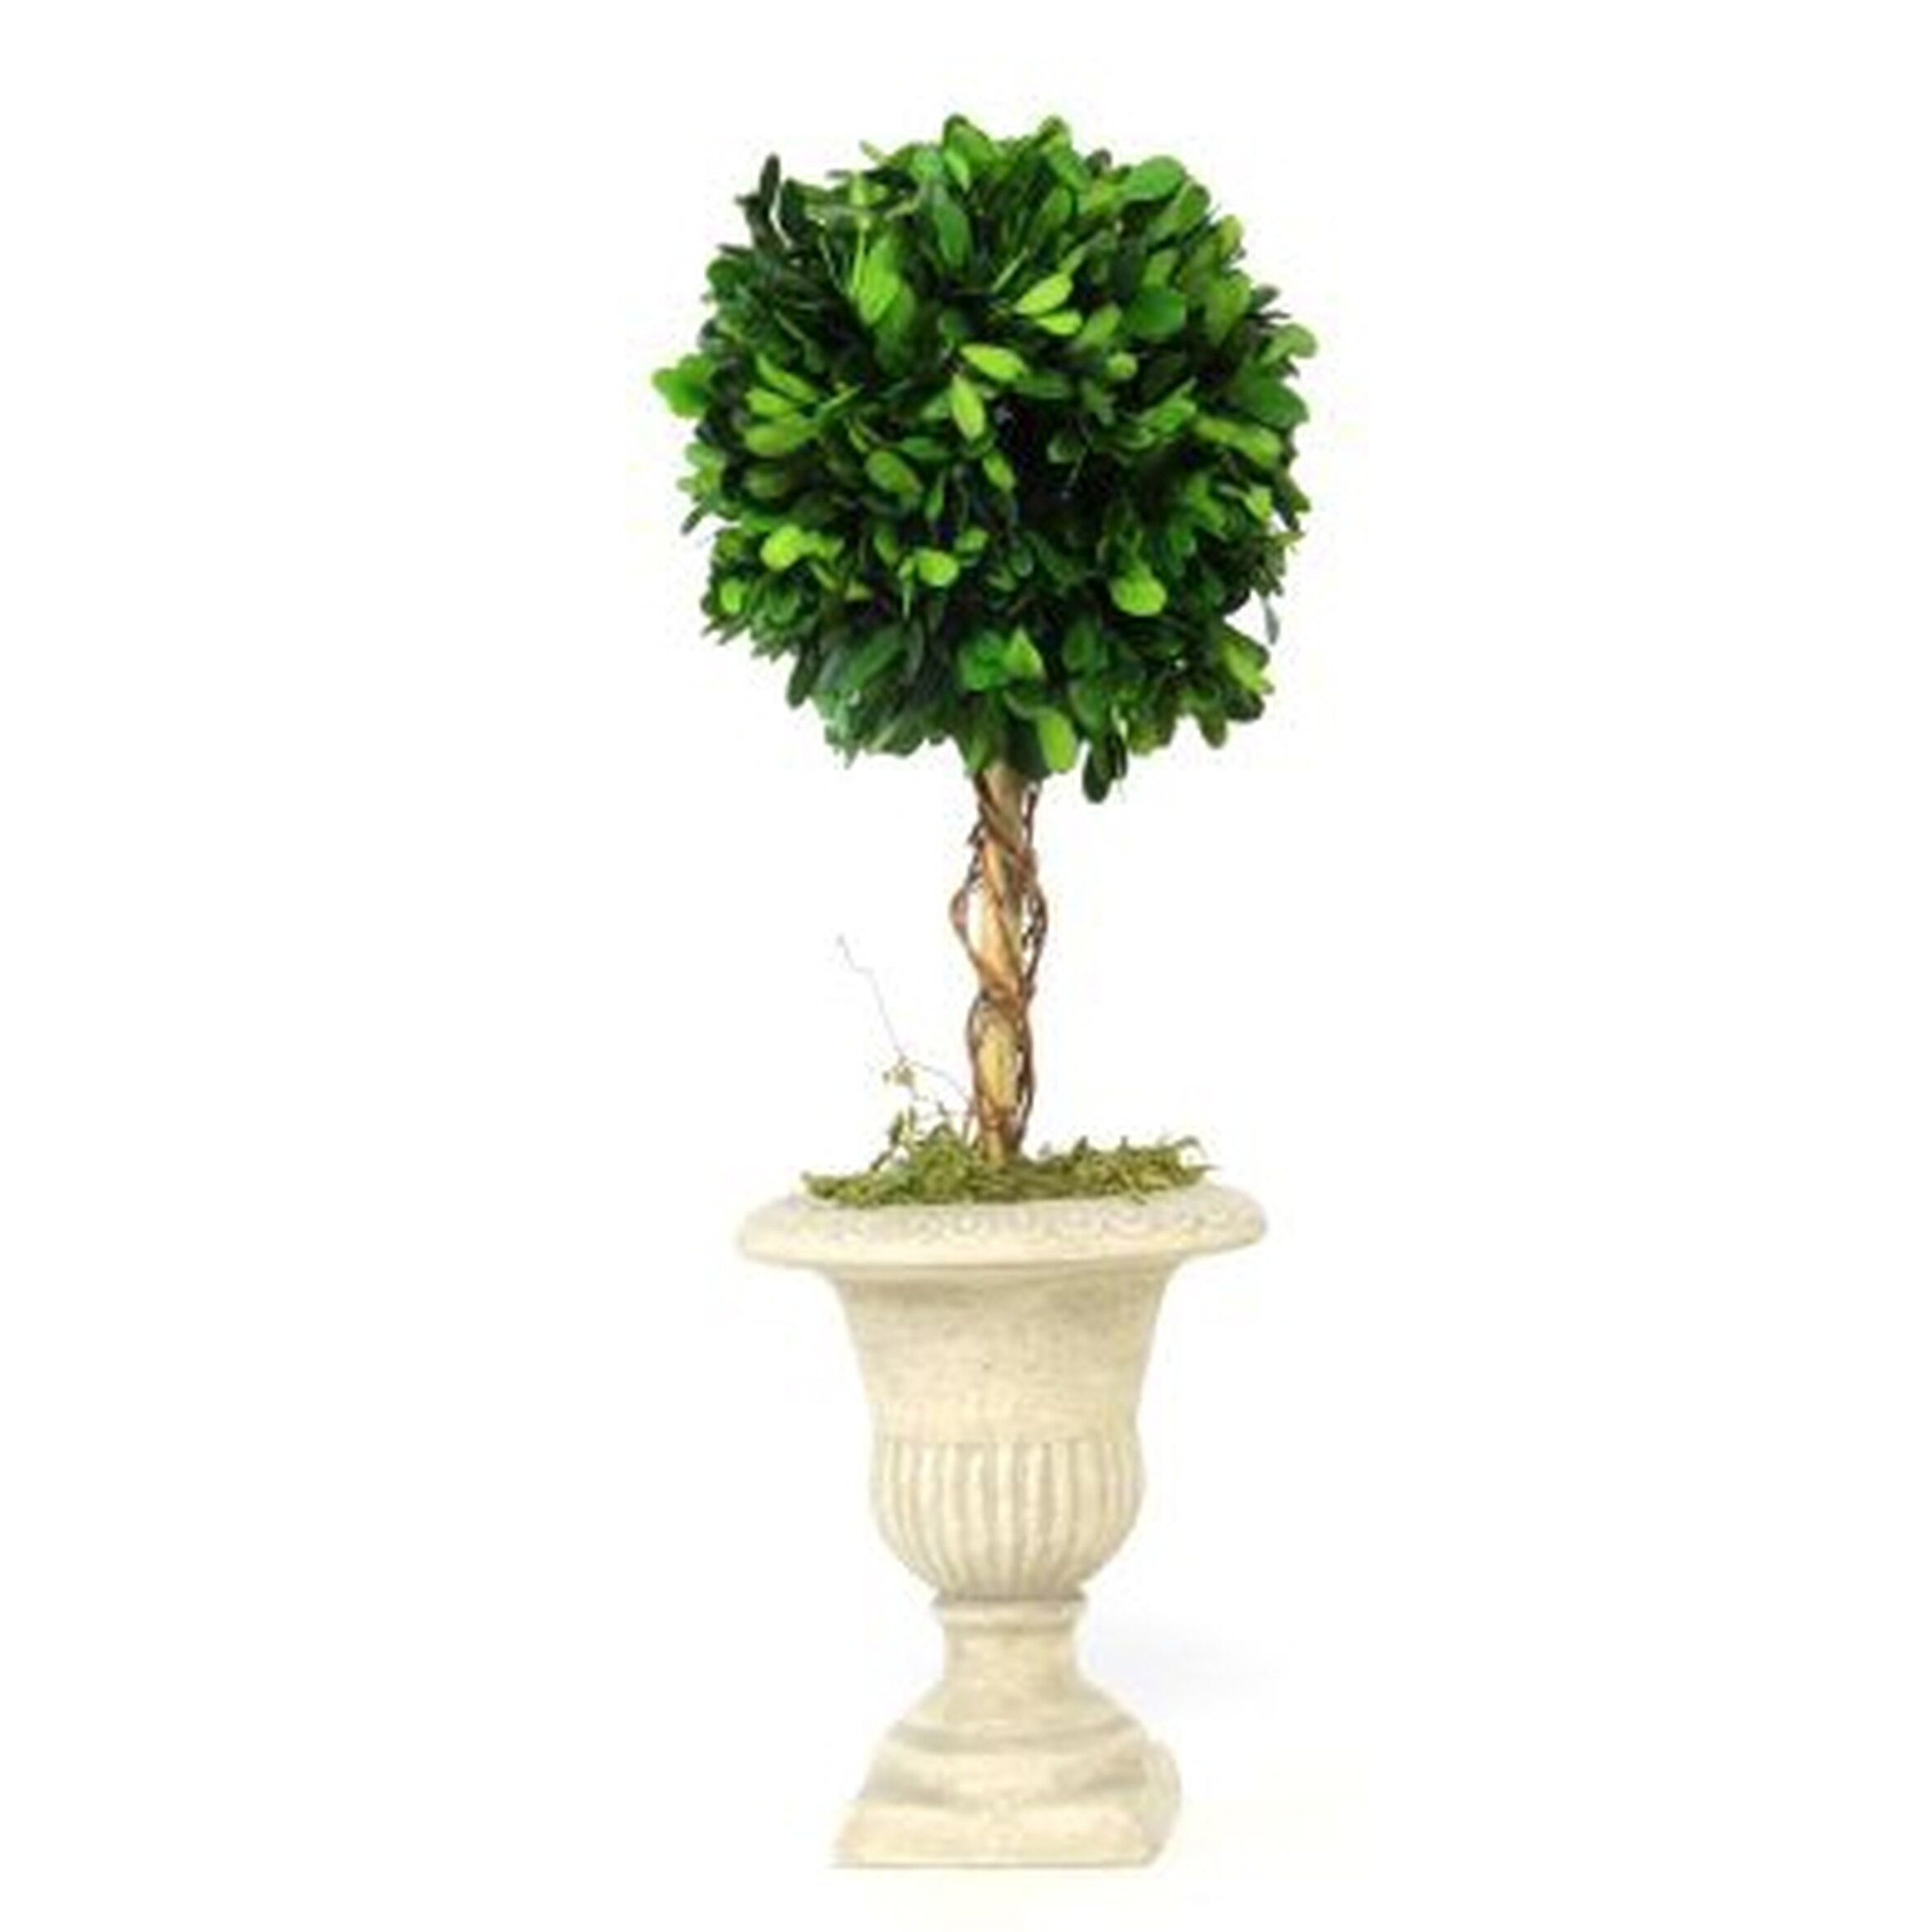 Charlton Home Boxwood Topiary Plant in Urn CHLH5546